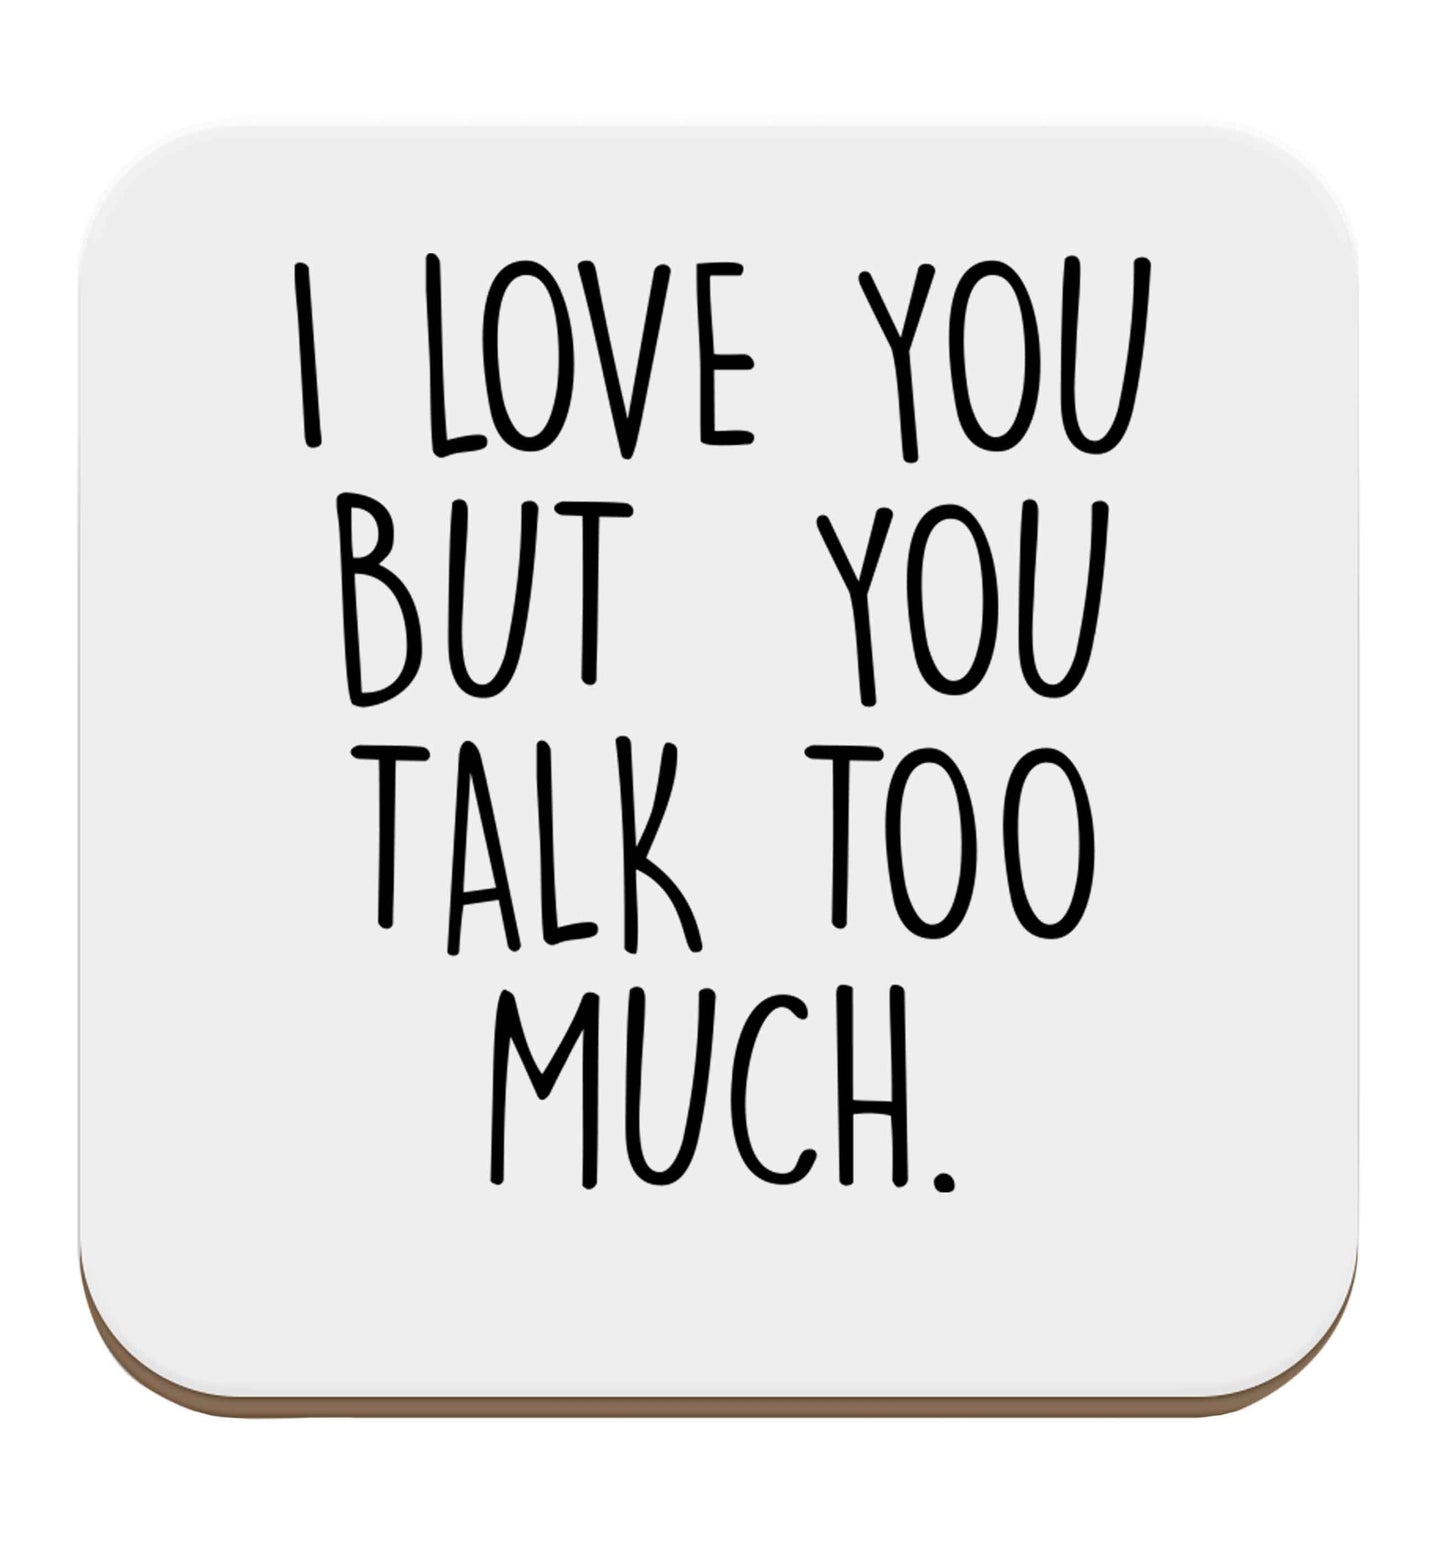 I love you but you talk too much set of four coasters